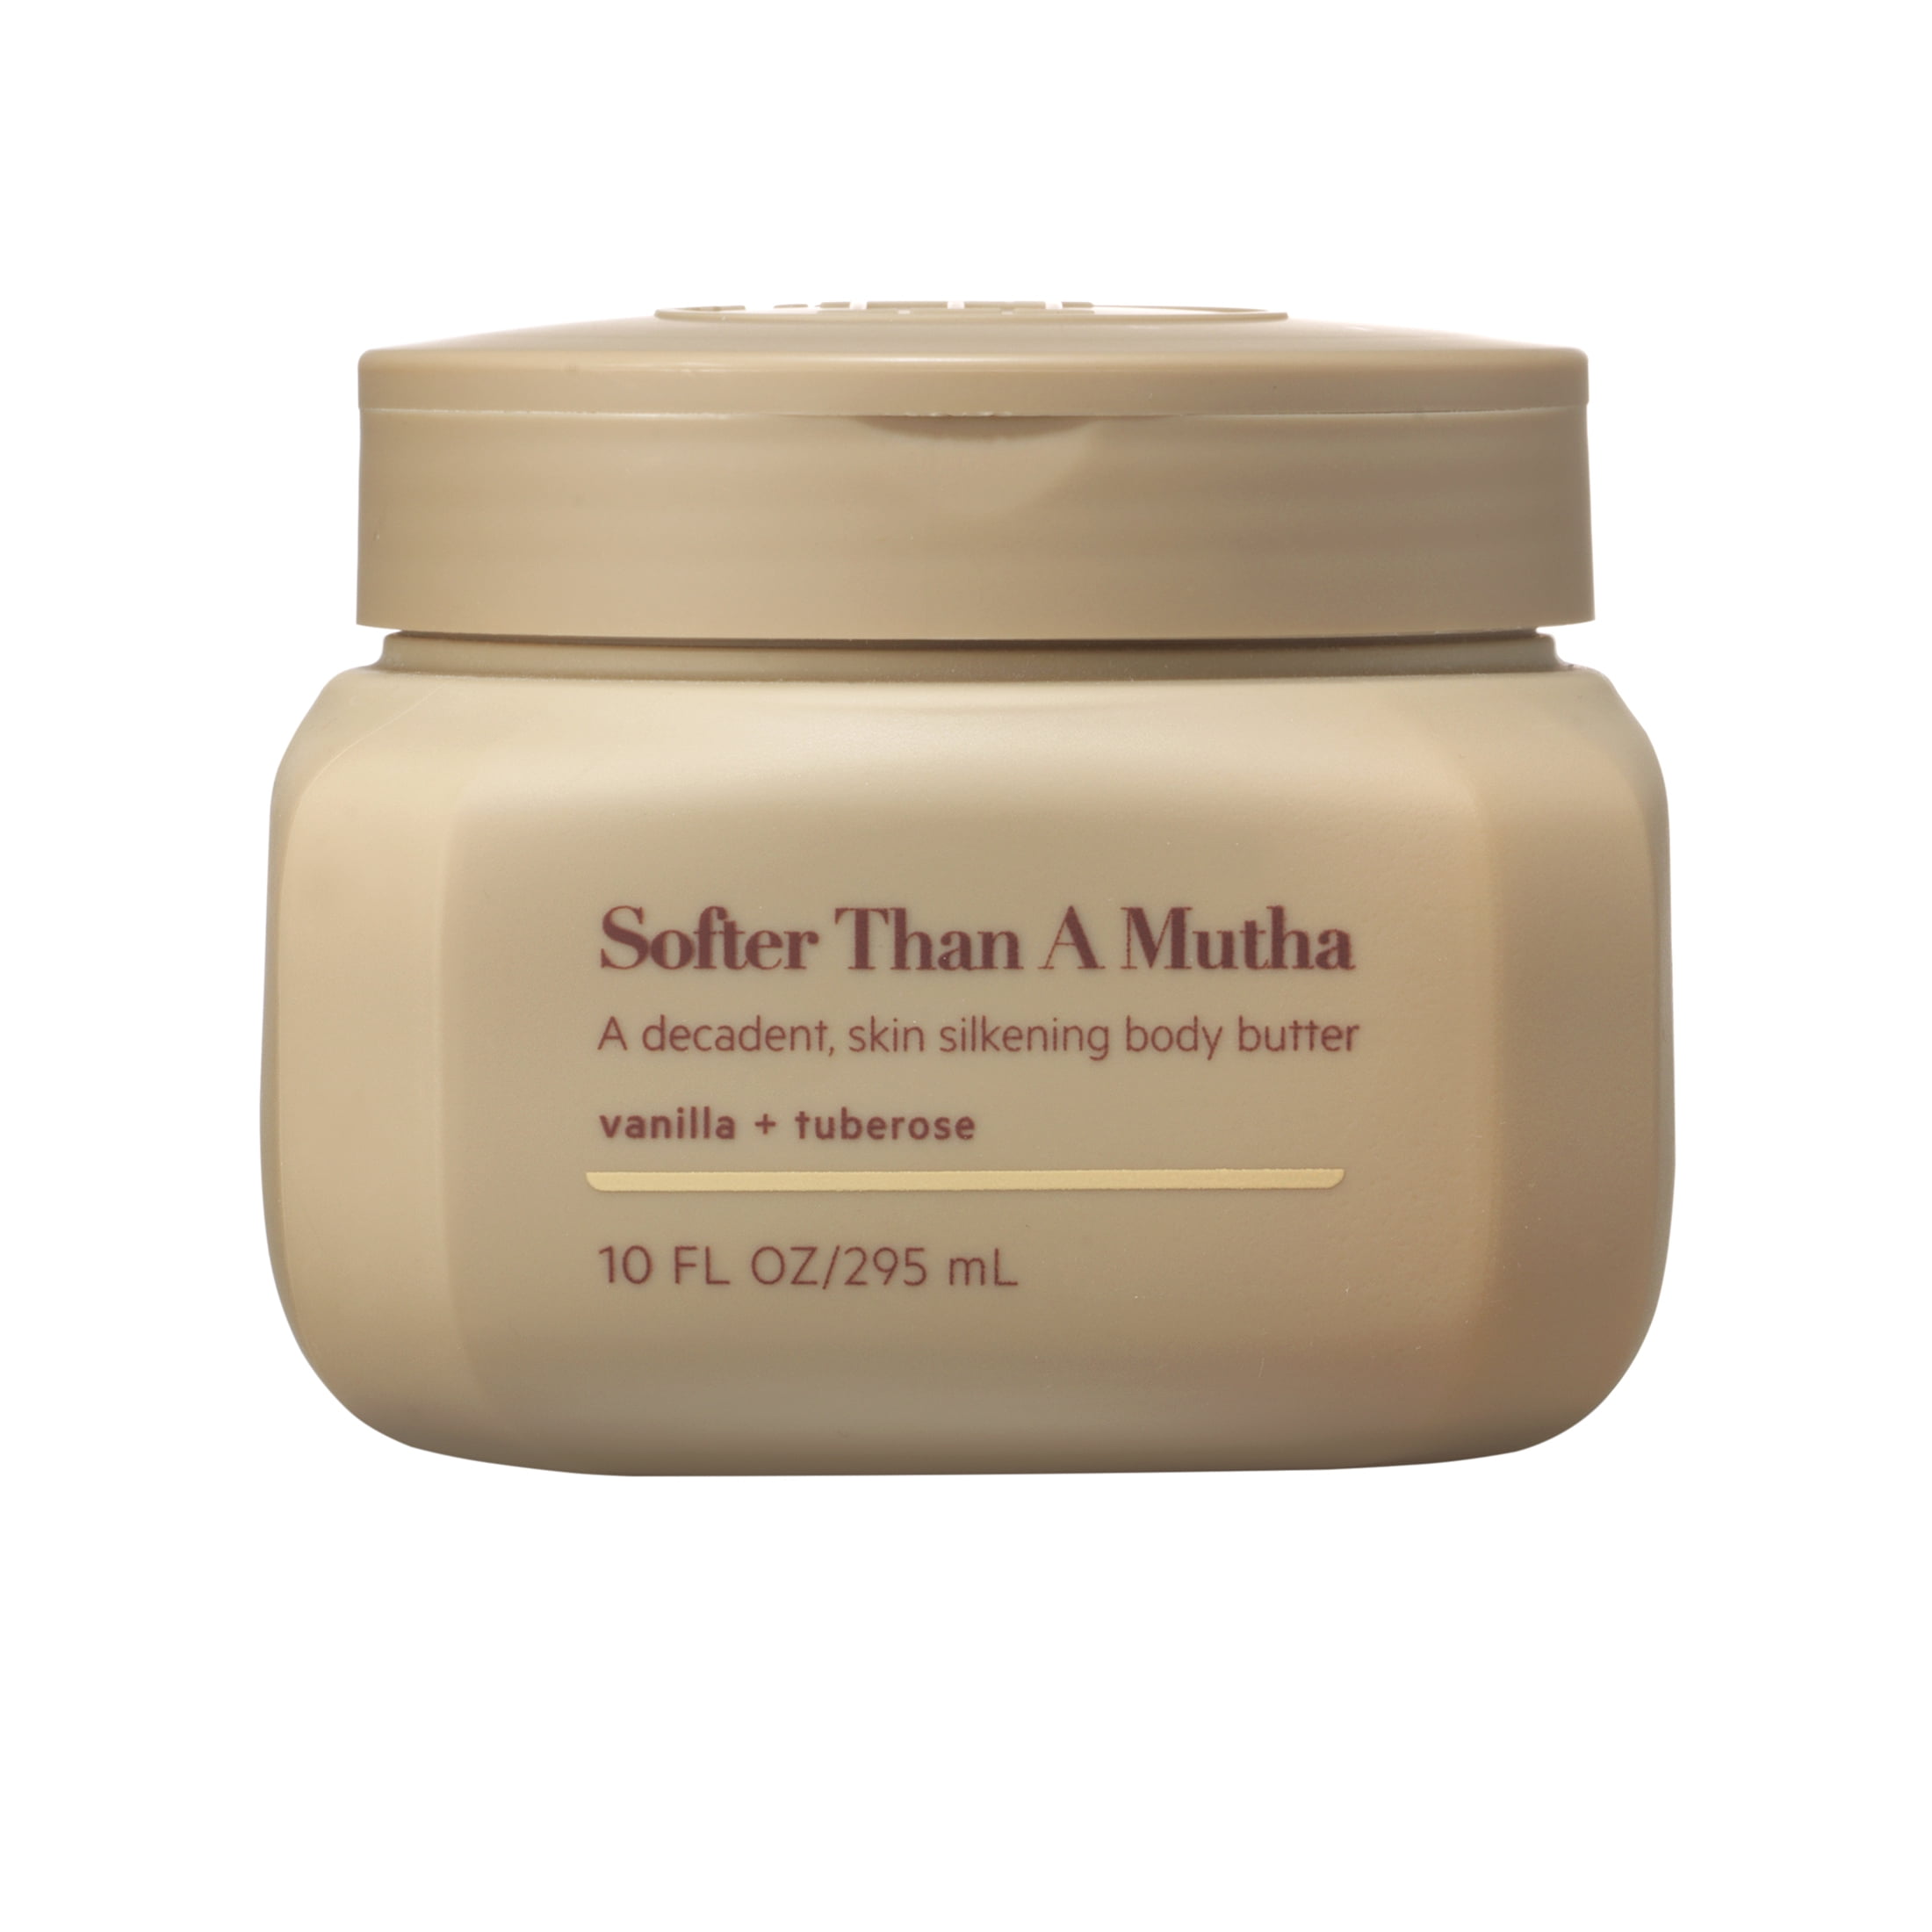 BODY BY TPH Softer Than A Mutha Vegan Softening Body Butter Cream with Shea Butter, Vitamin E & Moringa Oil for Dry Skin | Sulfate & Paraben Free | Deep Body Lotion For Women & Men, 10 fl. oz